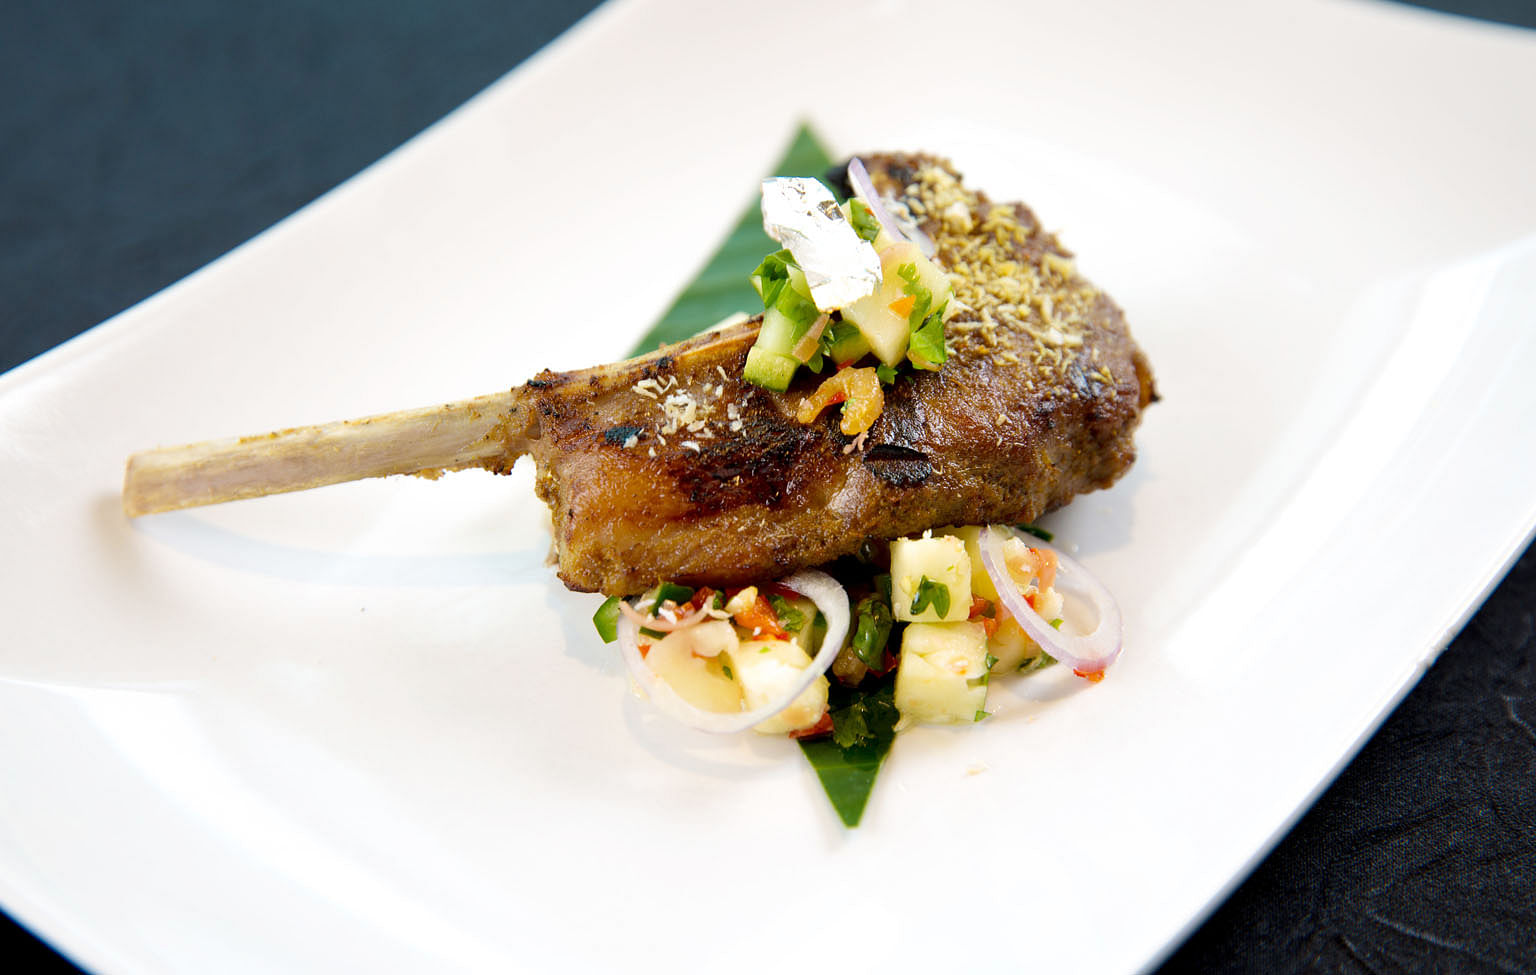 One of the star items is the Rendang Style Lamb Rack with Honey Pineapple Kerabu Salsa.